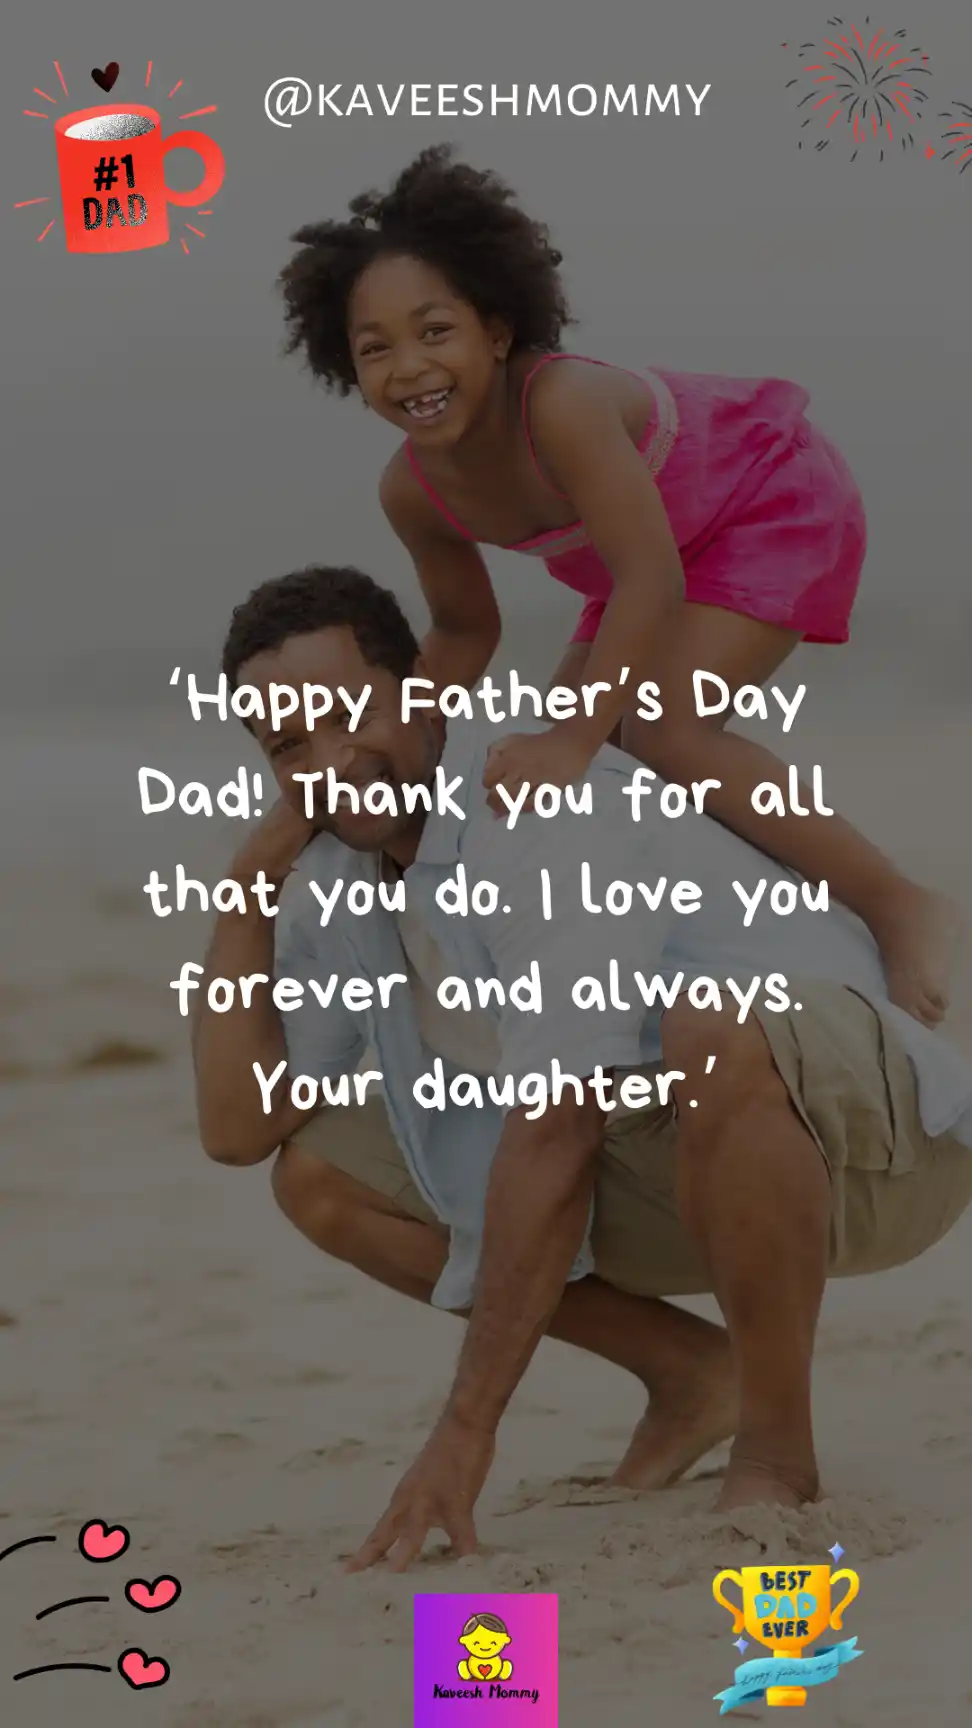 miss you daddy quotes from daughter-‘Happy Father’s Day Dad! Thank you for all that you do. I love you forever and always. Your daughter.’